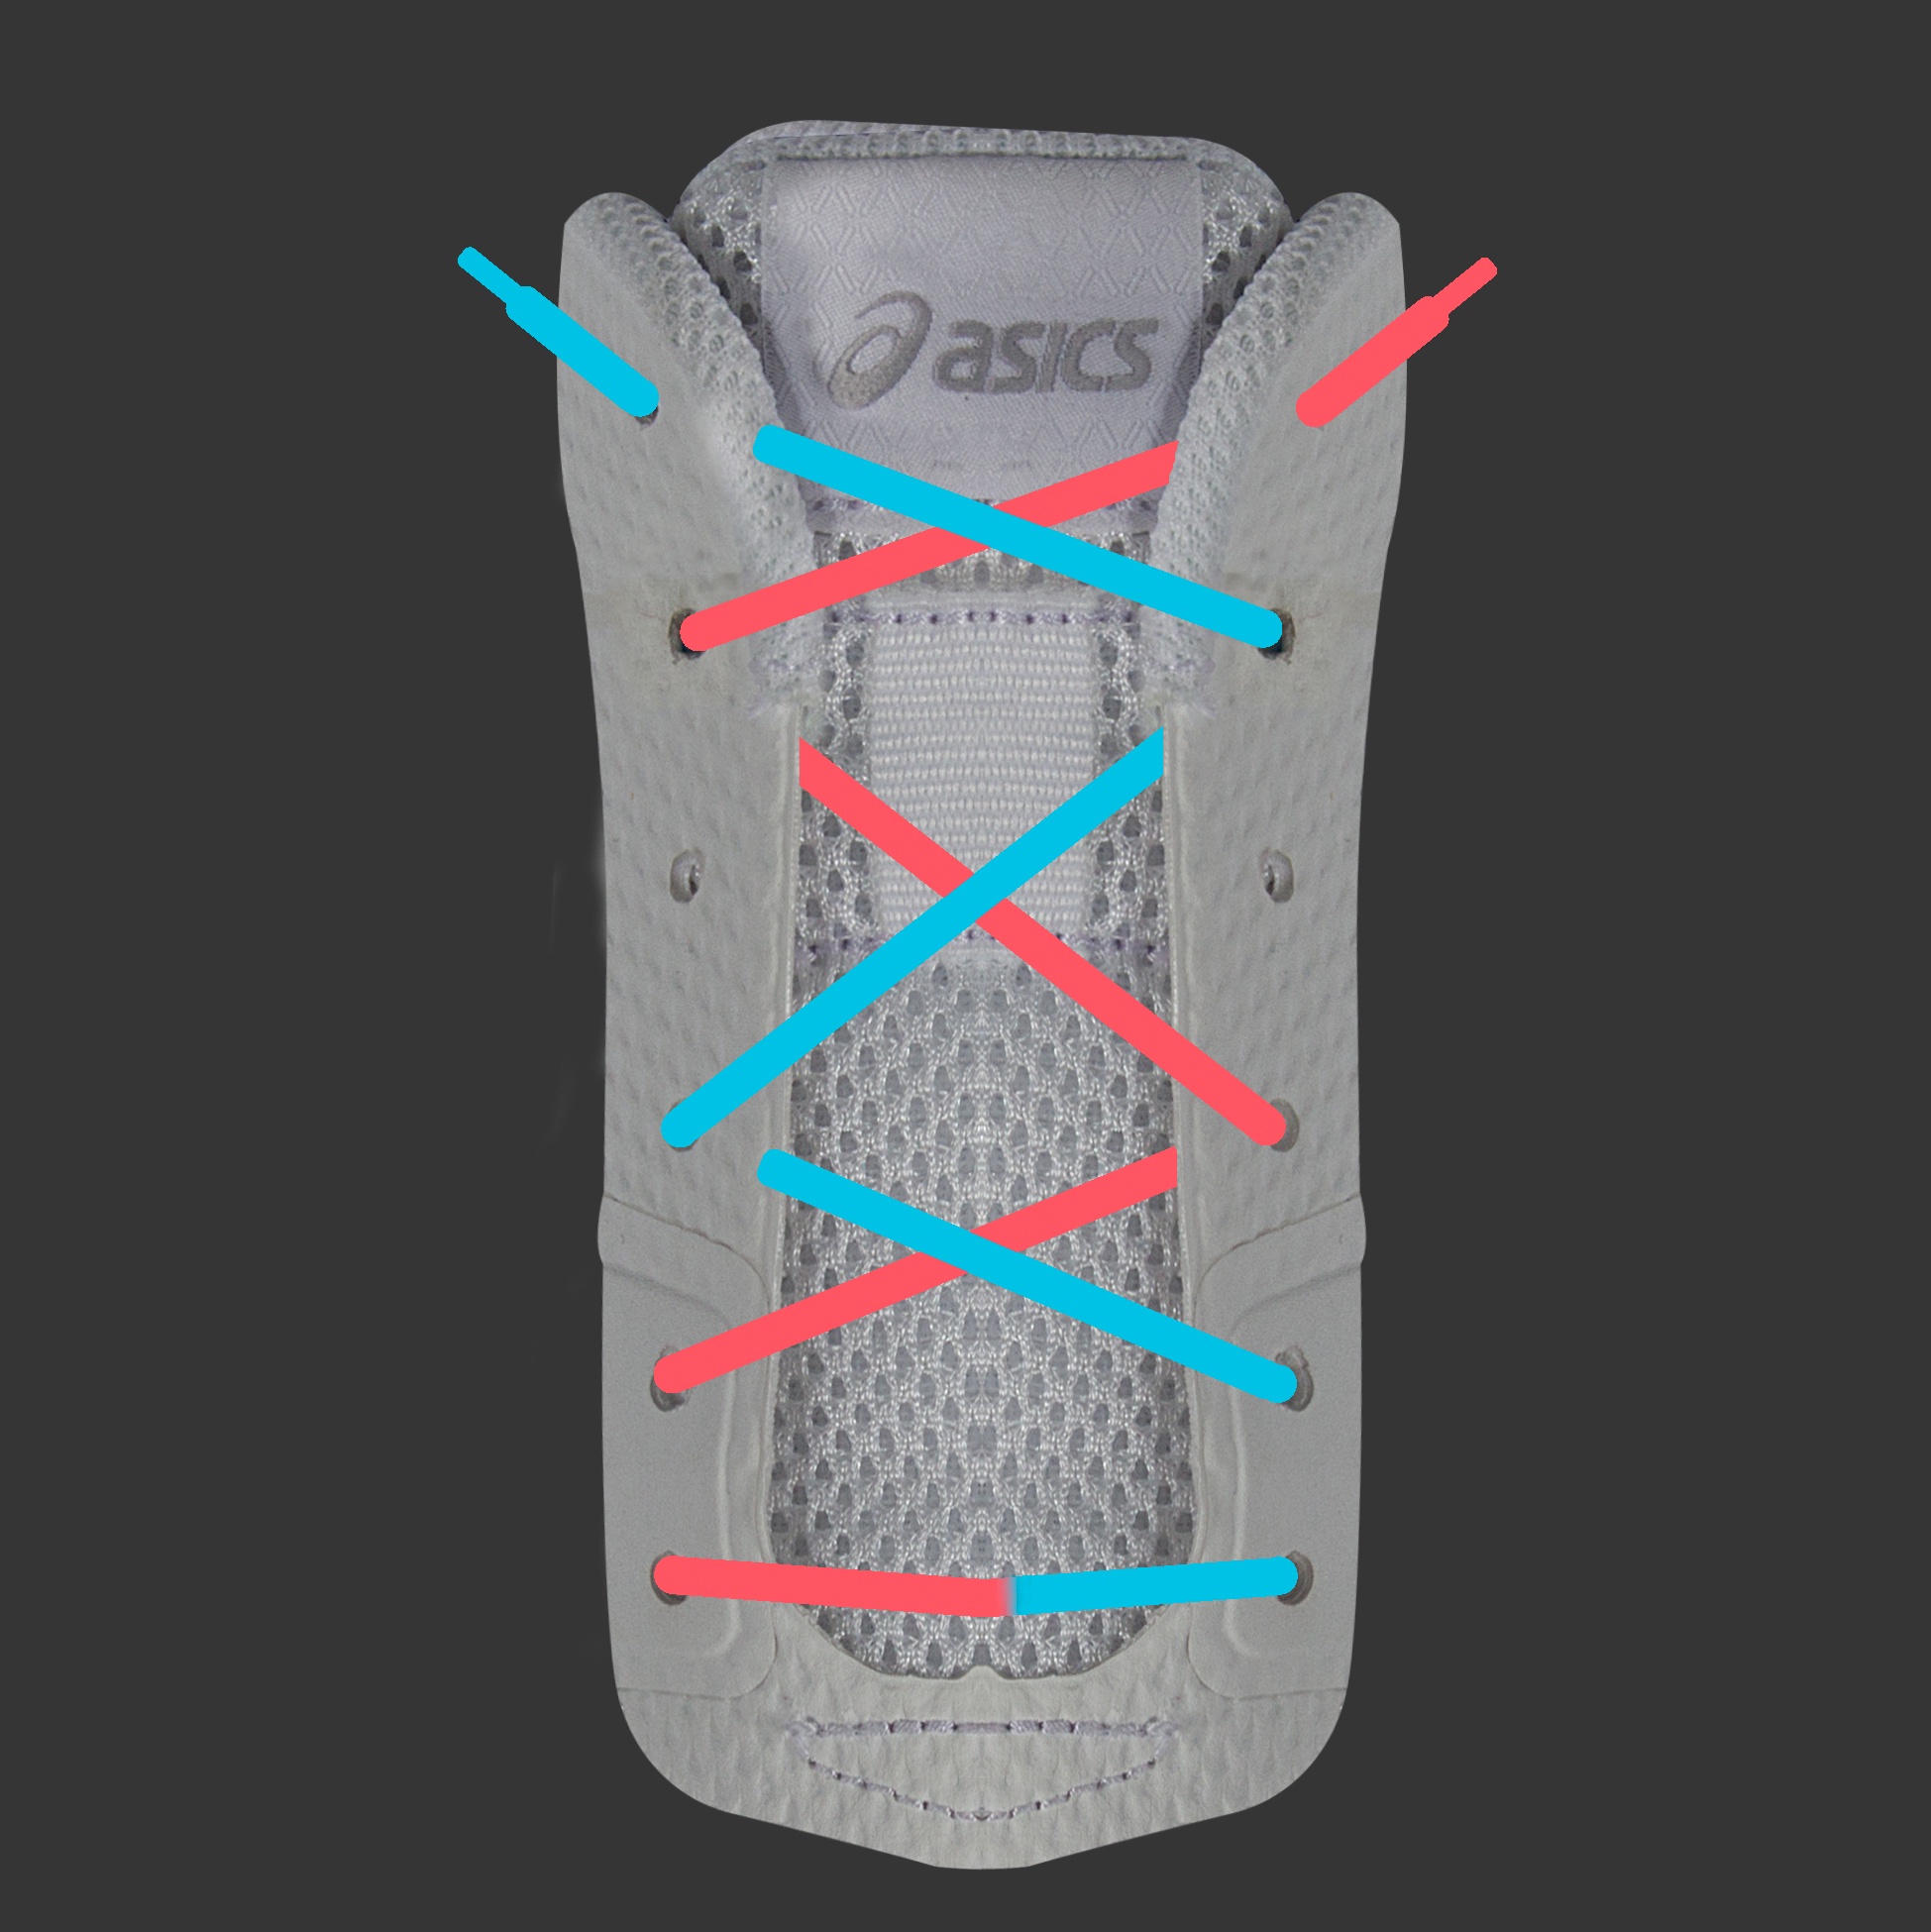 shoelaces for asics running shoes